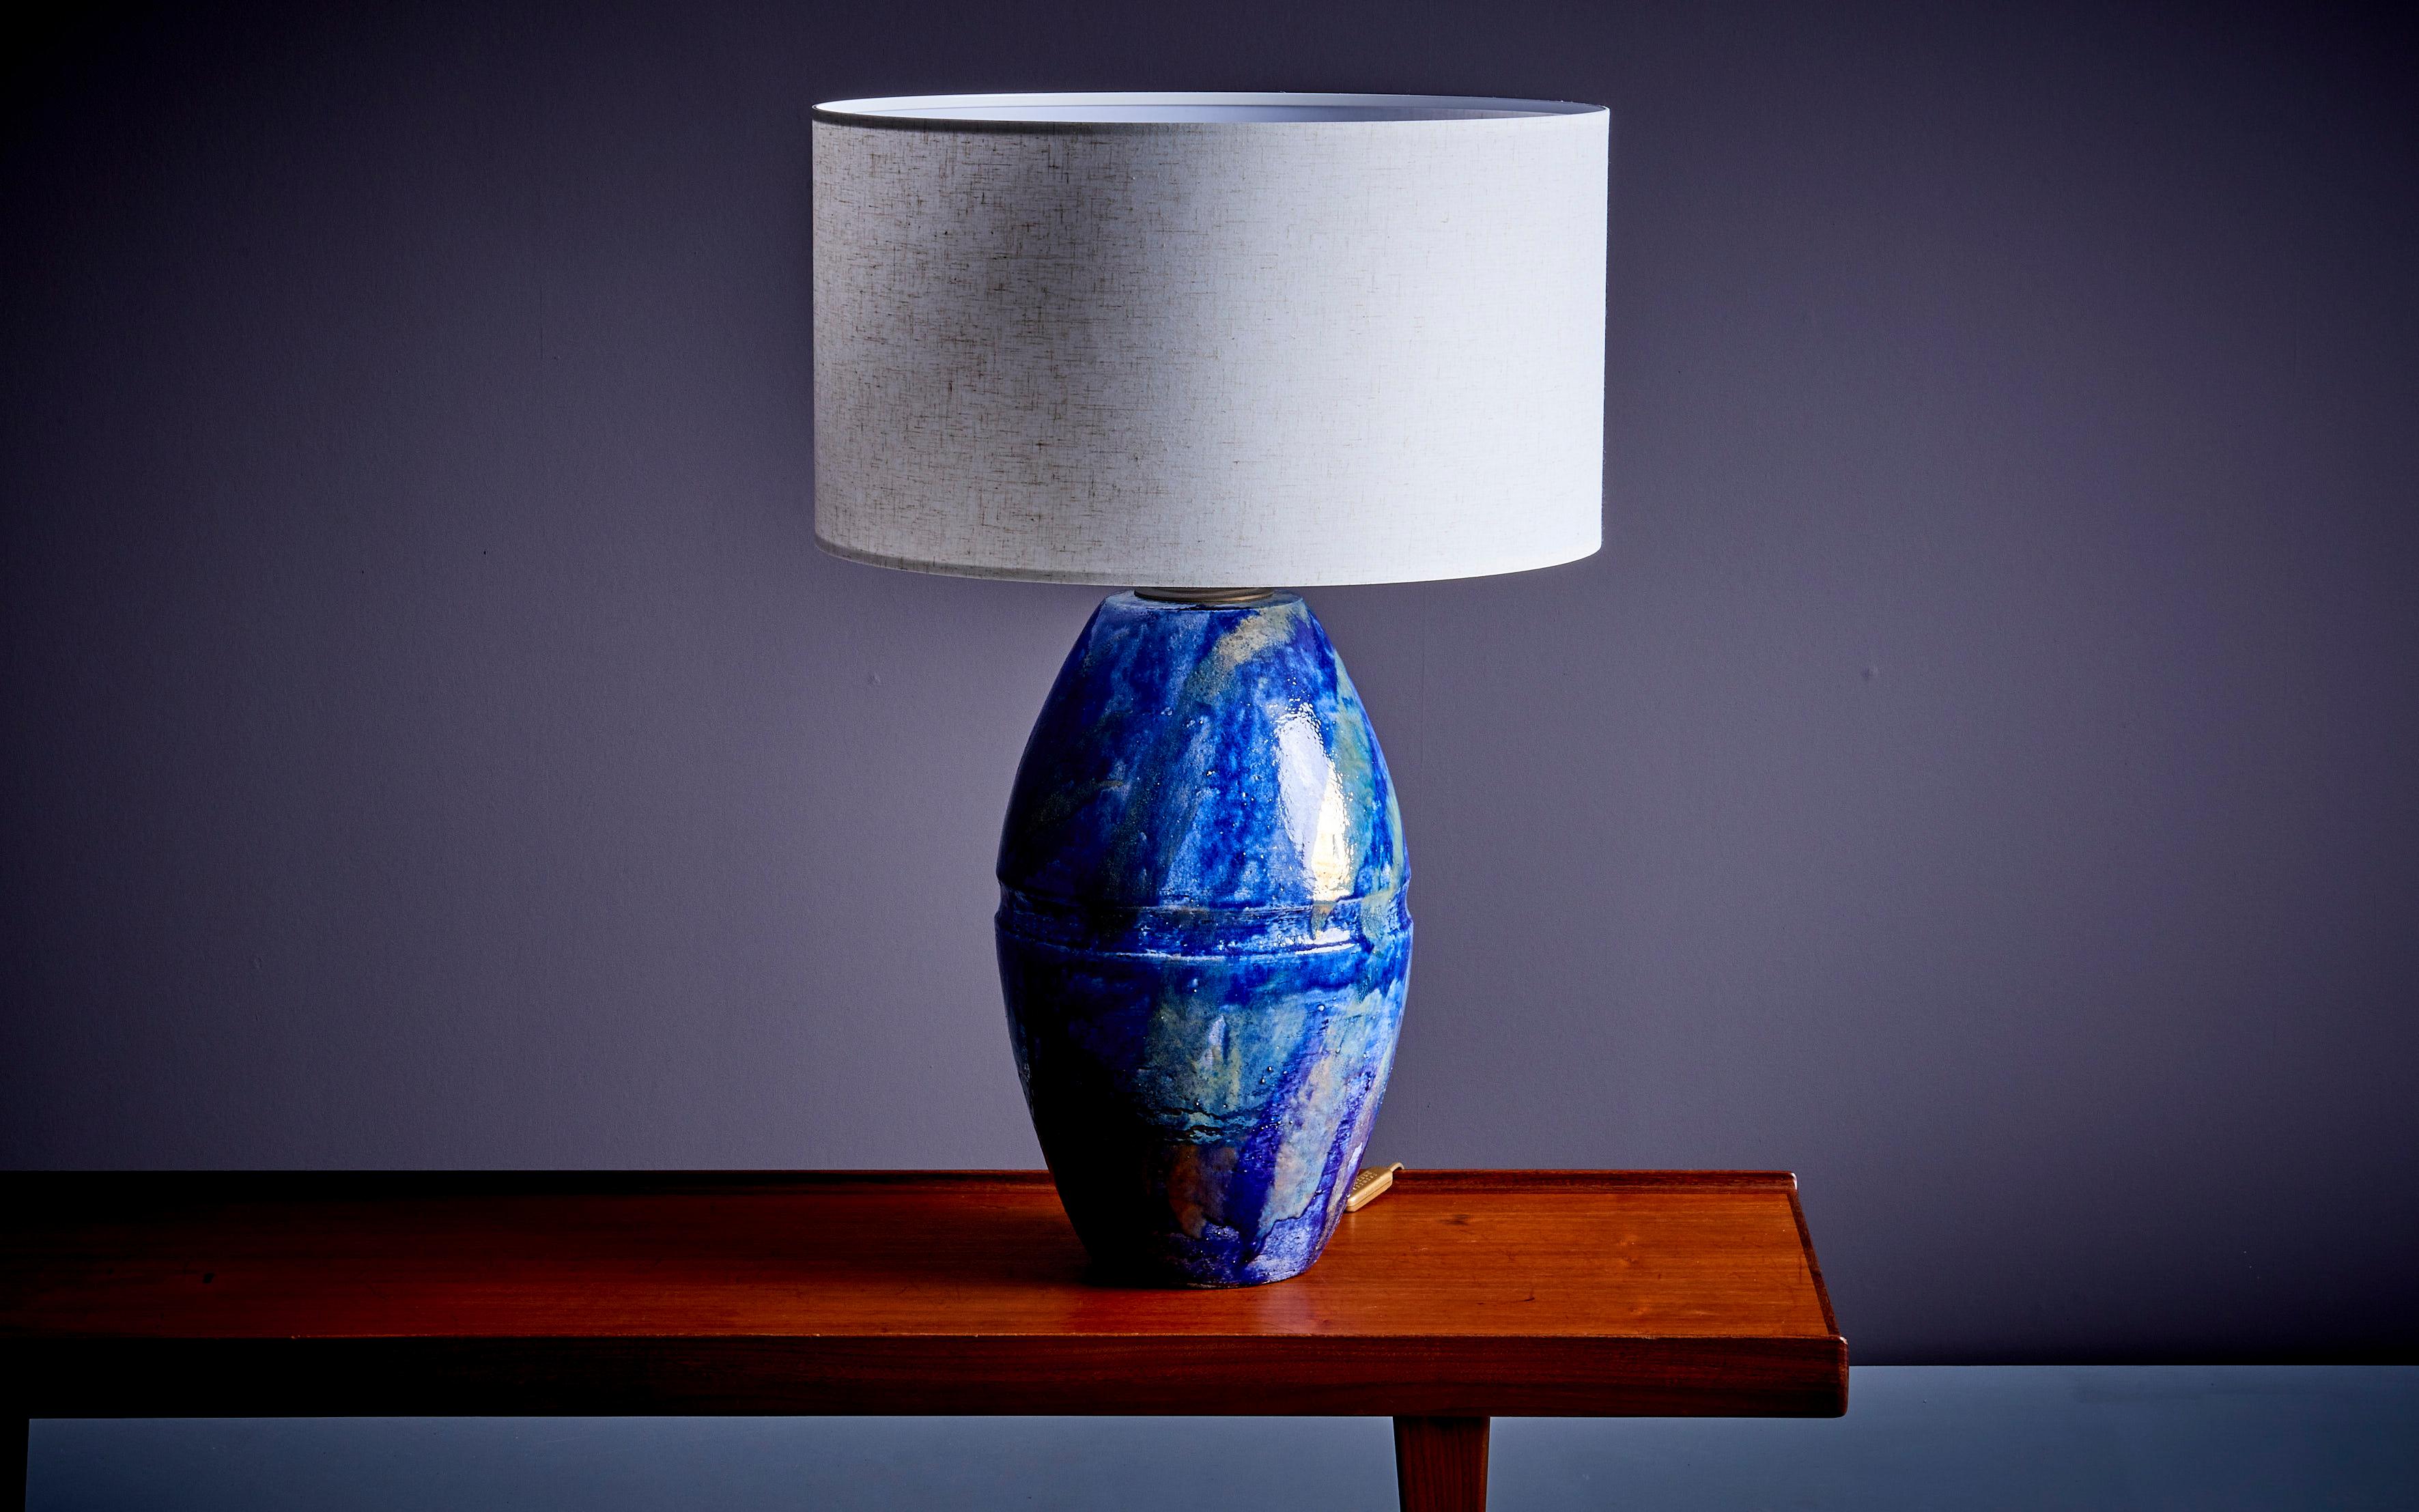 Huge Table Lamp in Blue Ceramic, France - 1960s. The measurements given apply to the lamp without the shade. The lamp incl. the shade measures 75cm in height, 50cm in diameter. Socket: 1x E27. Please note: Lamp should be fitted professionally in